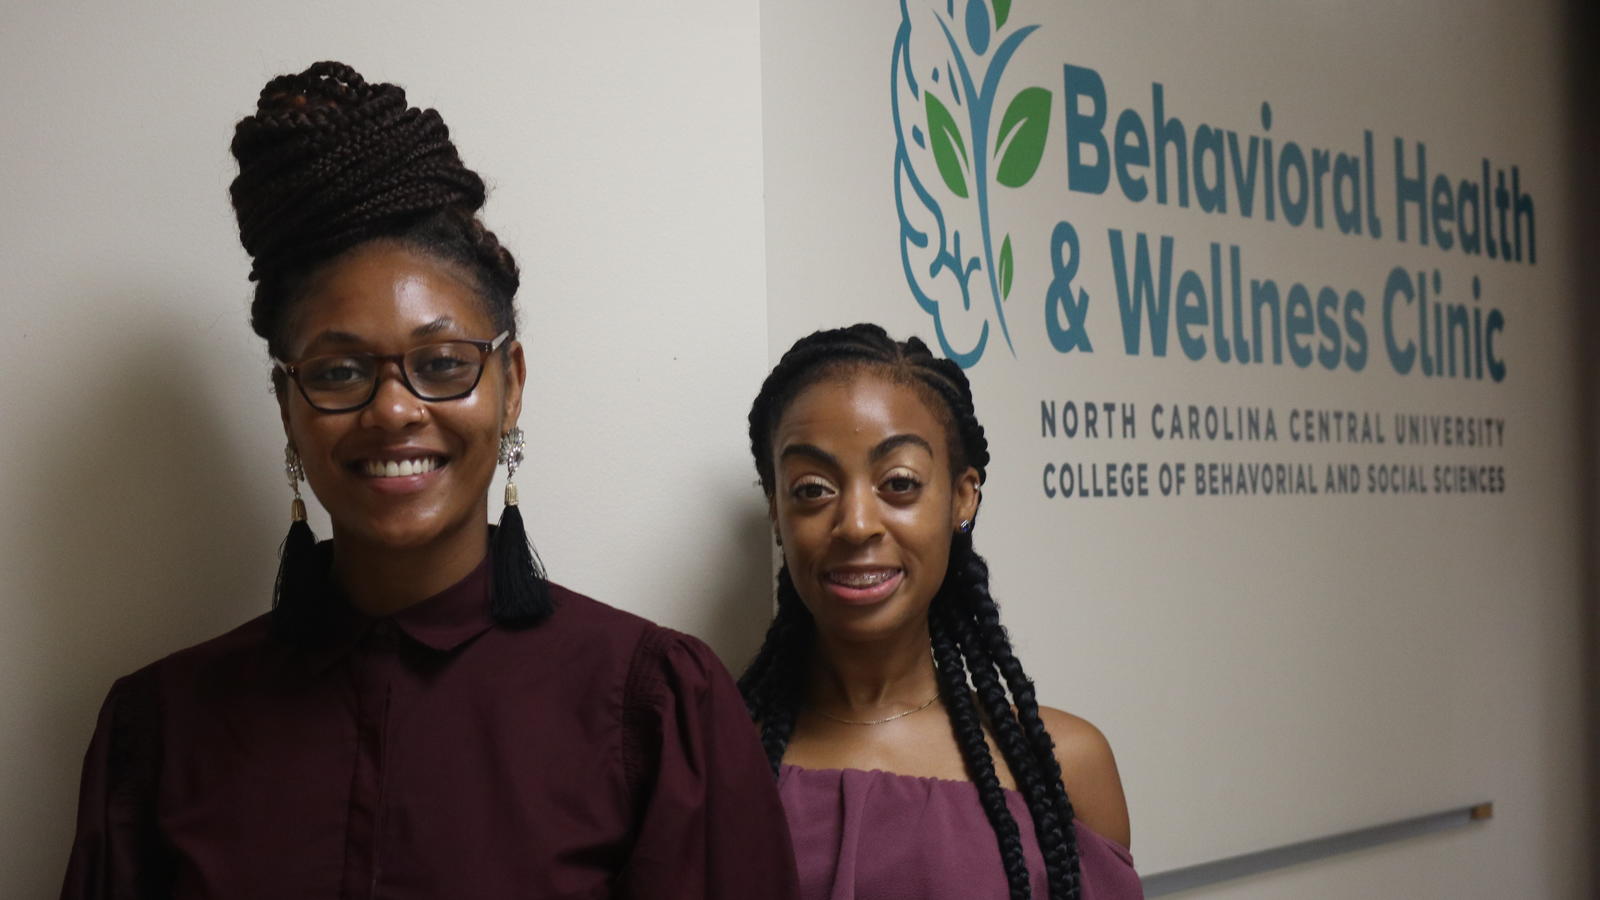 Behavioral Health and Wellness Clinic